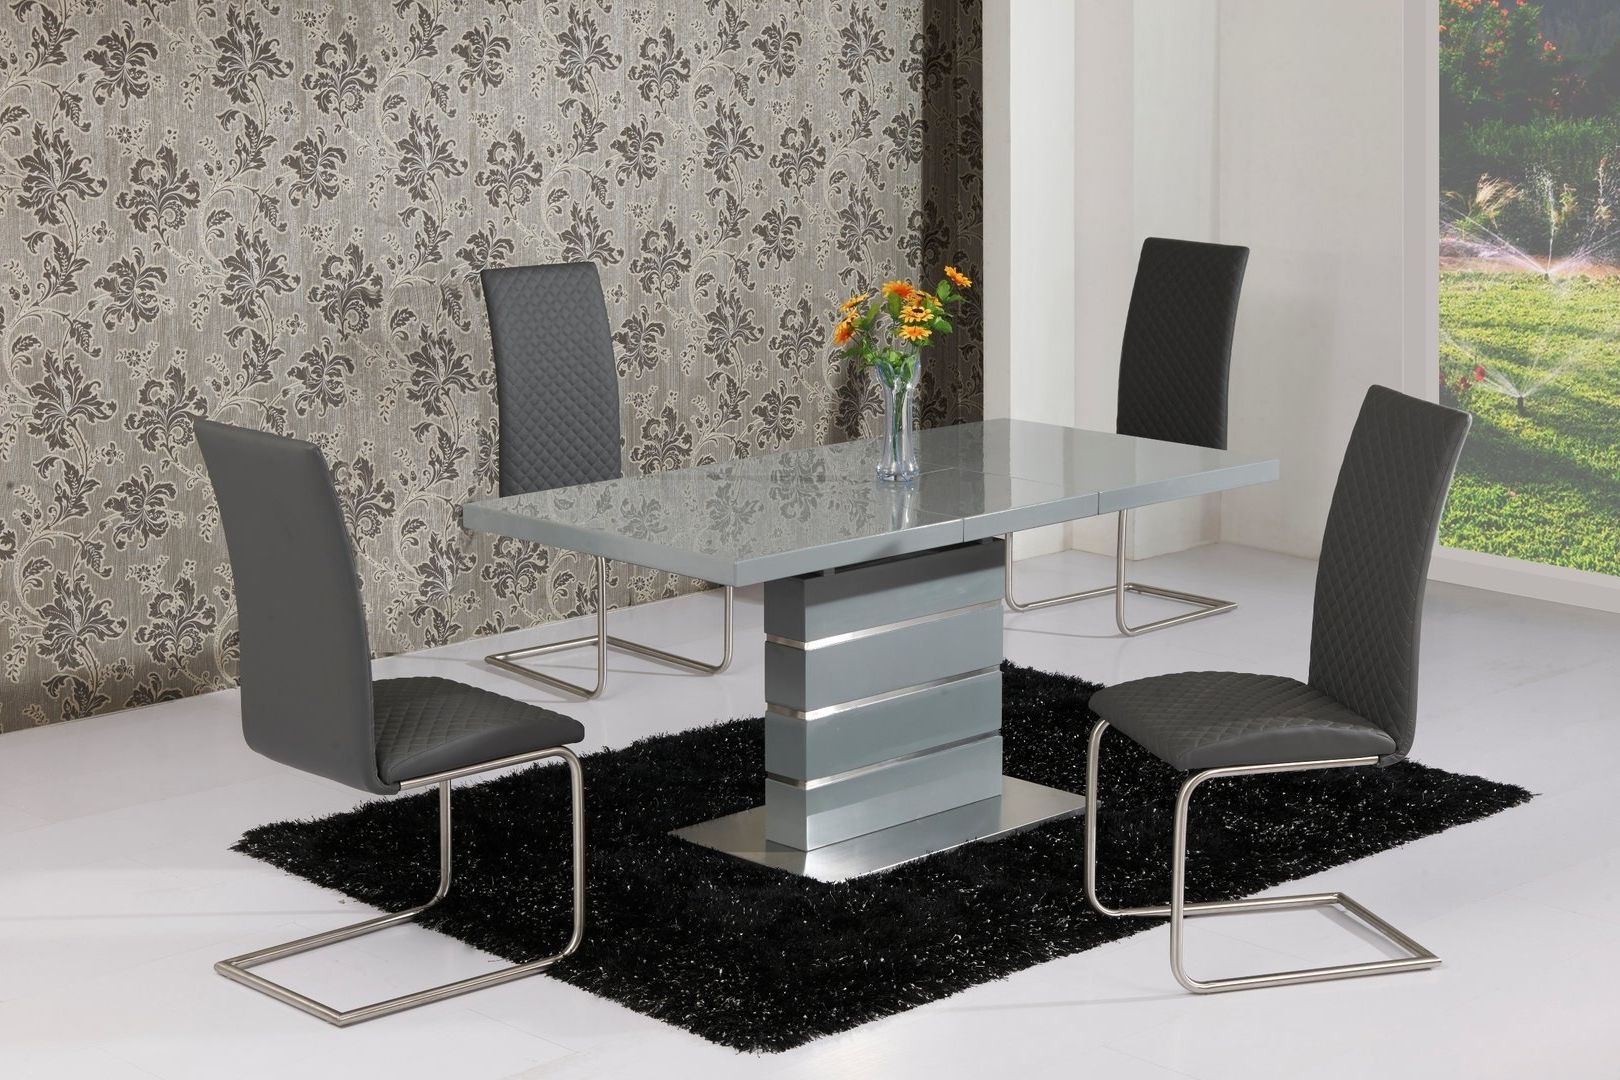 Popular Extending Grey High Gloss Dining Table And 4 Grey Chairs For Grey Dining Tables (View 9 of 25)